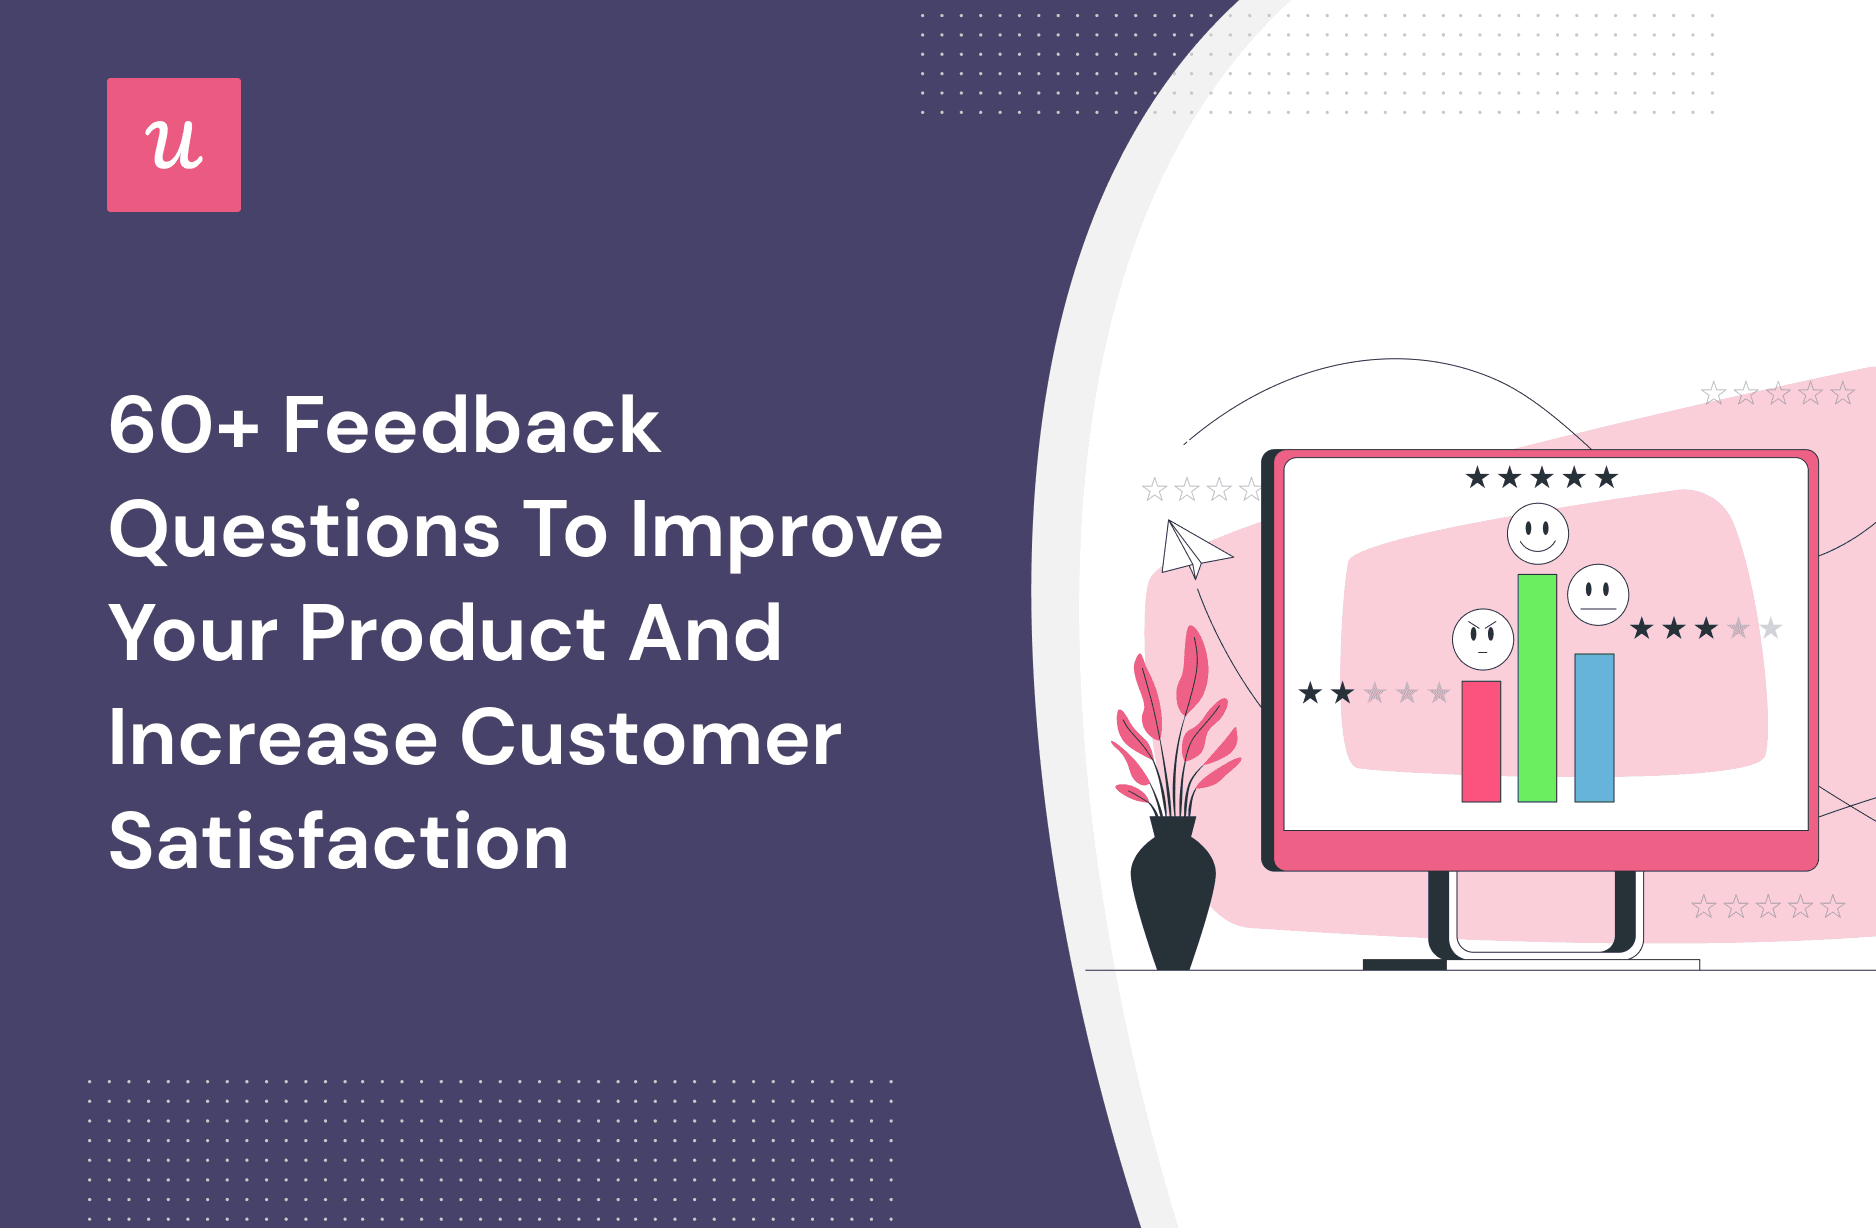 60+ Feedback Questions to Improve Your Product and Increase Customer Satisfaction cover